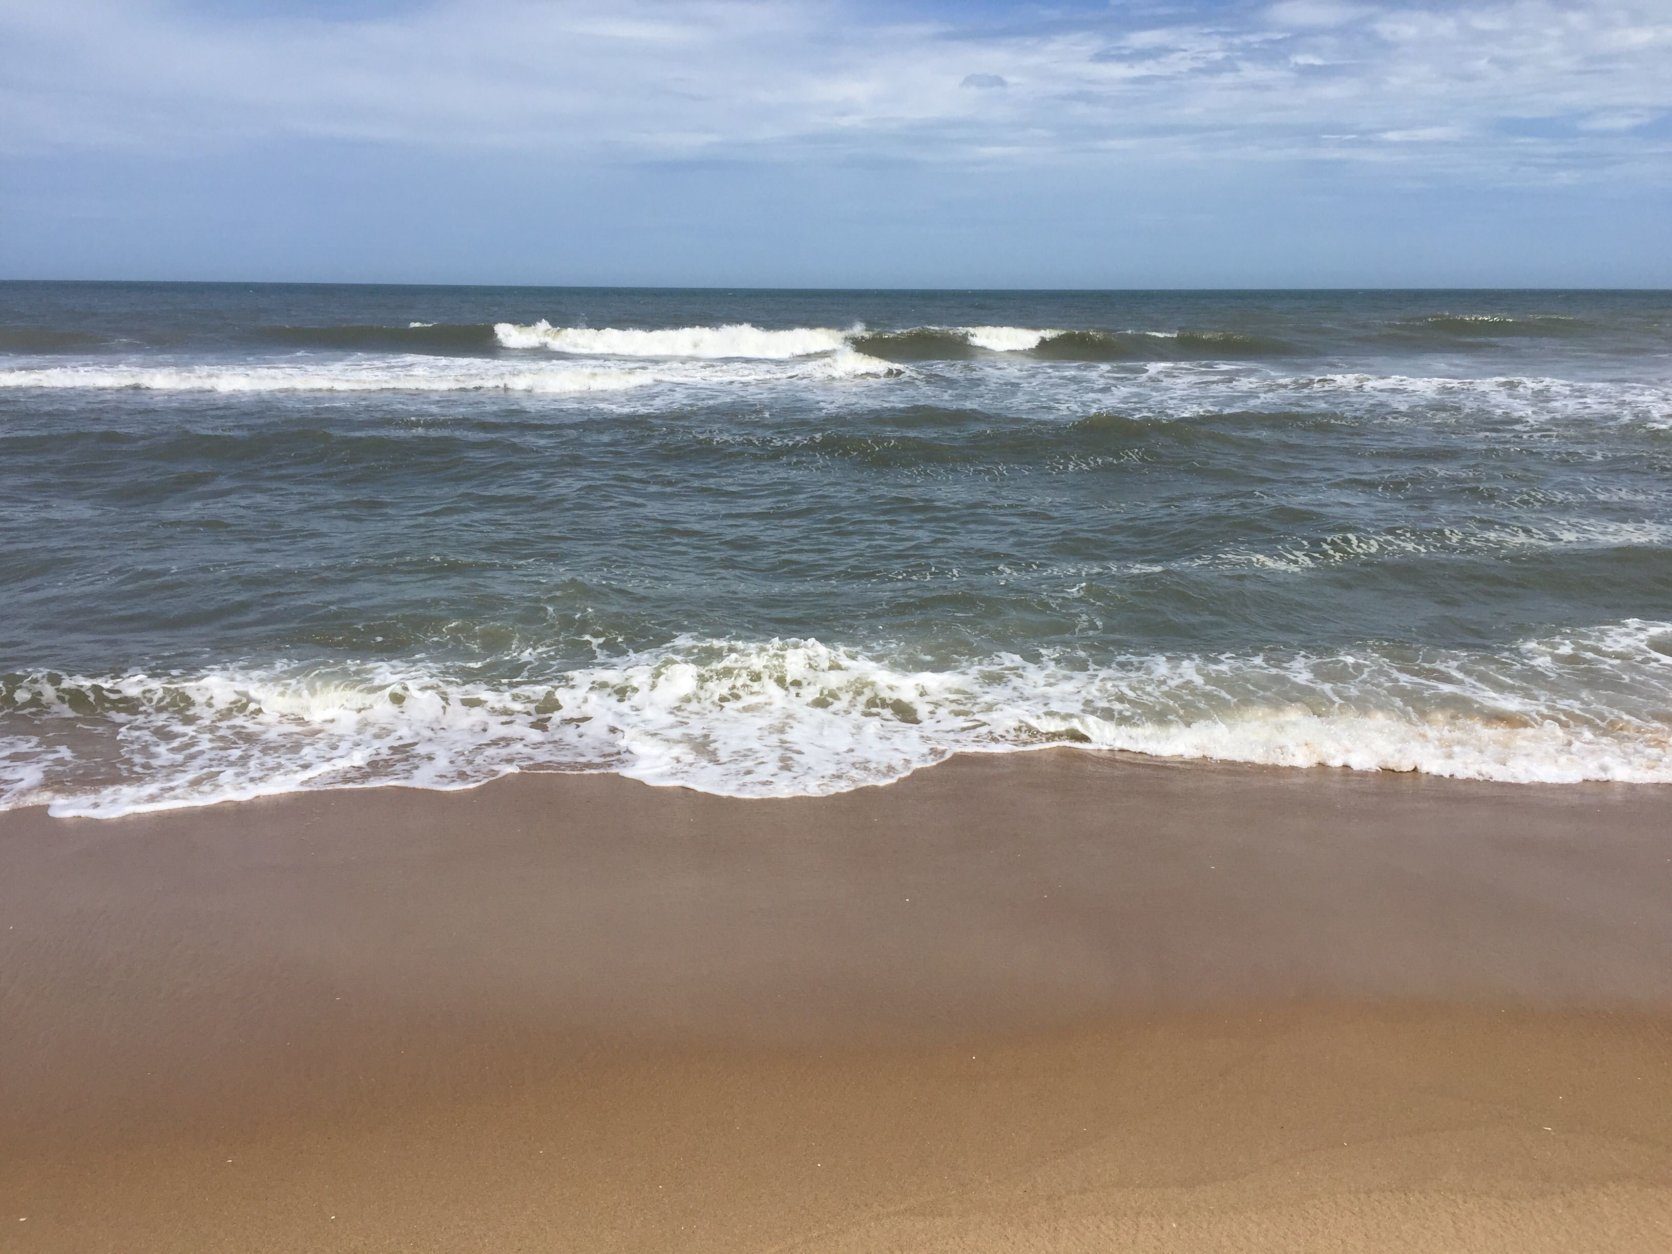 Despite the beauty at local beaches, bacteria that can cause a serious disease exists, naturally. Is there reason to be concerned? (WTOP/John Domen)